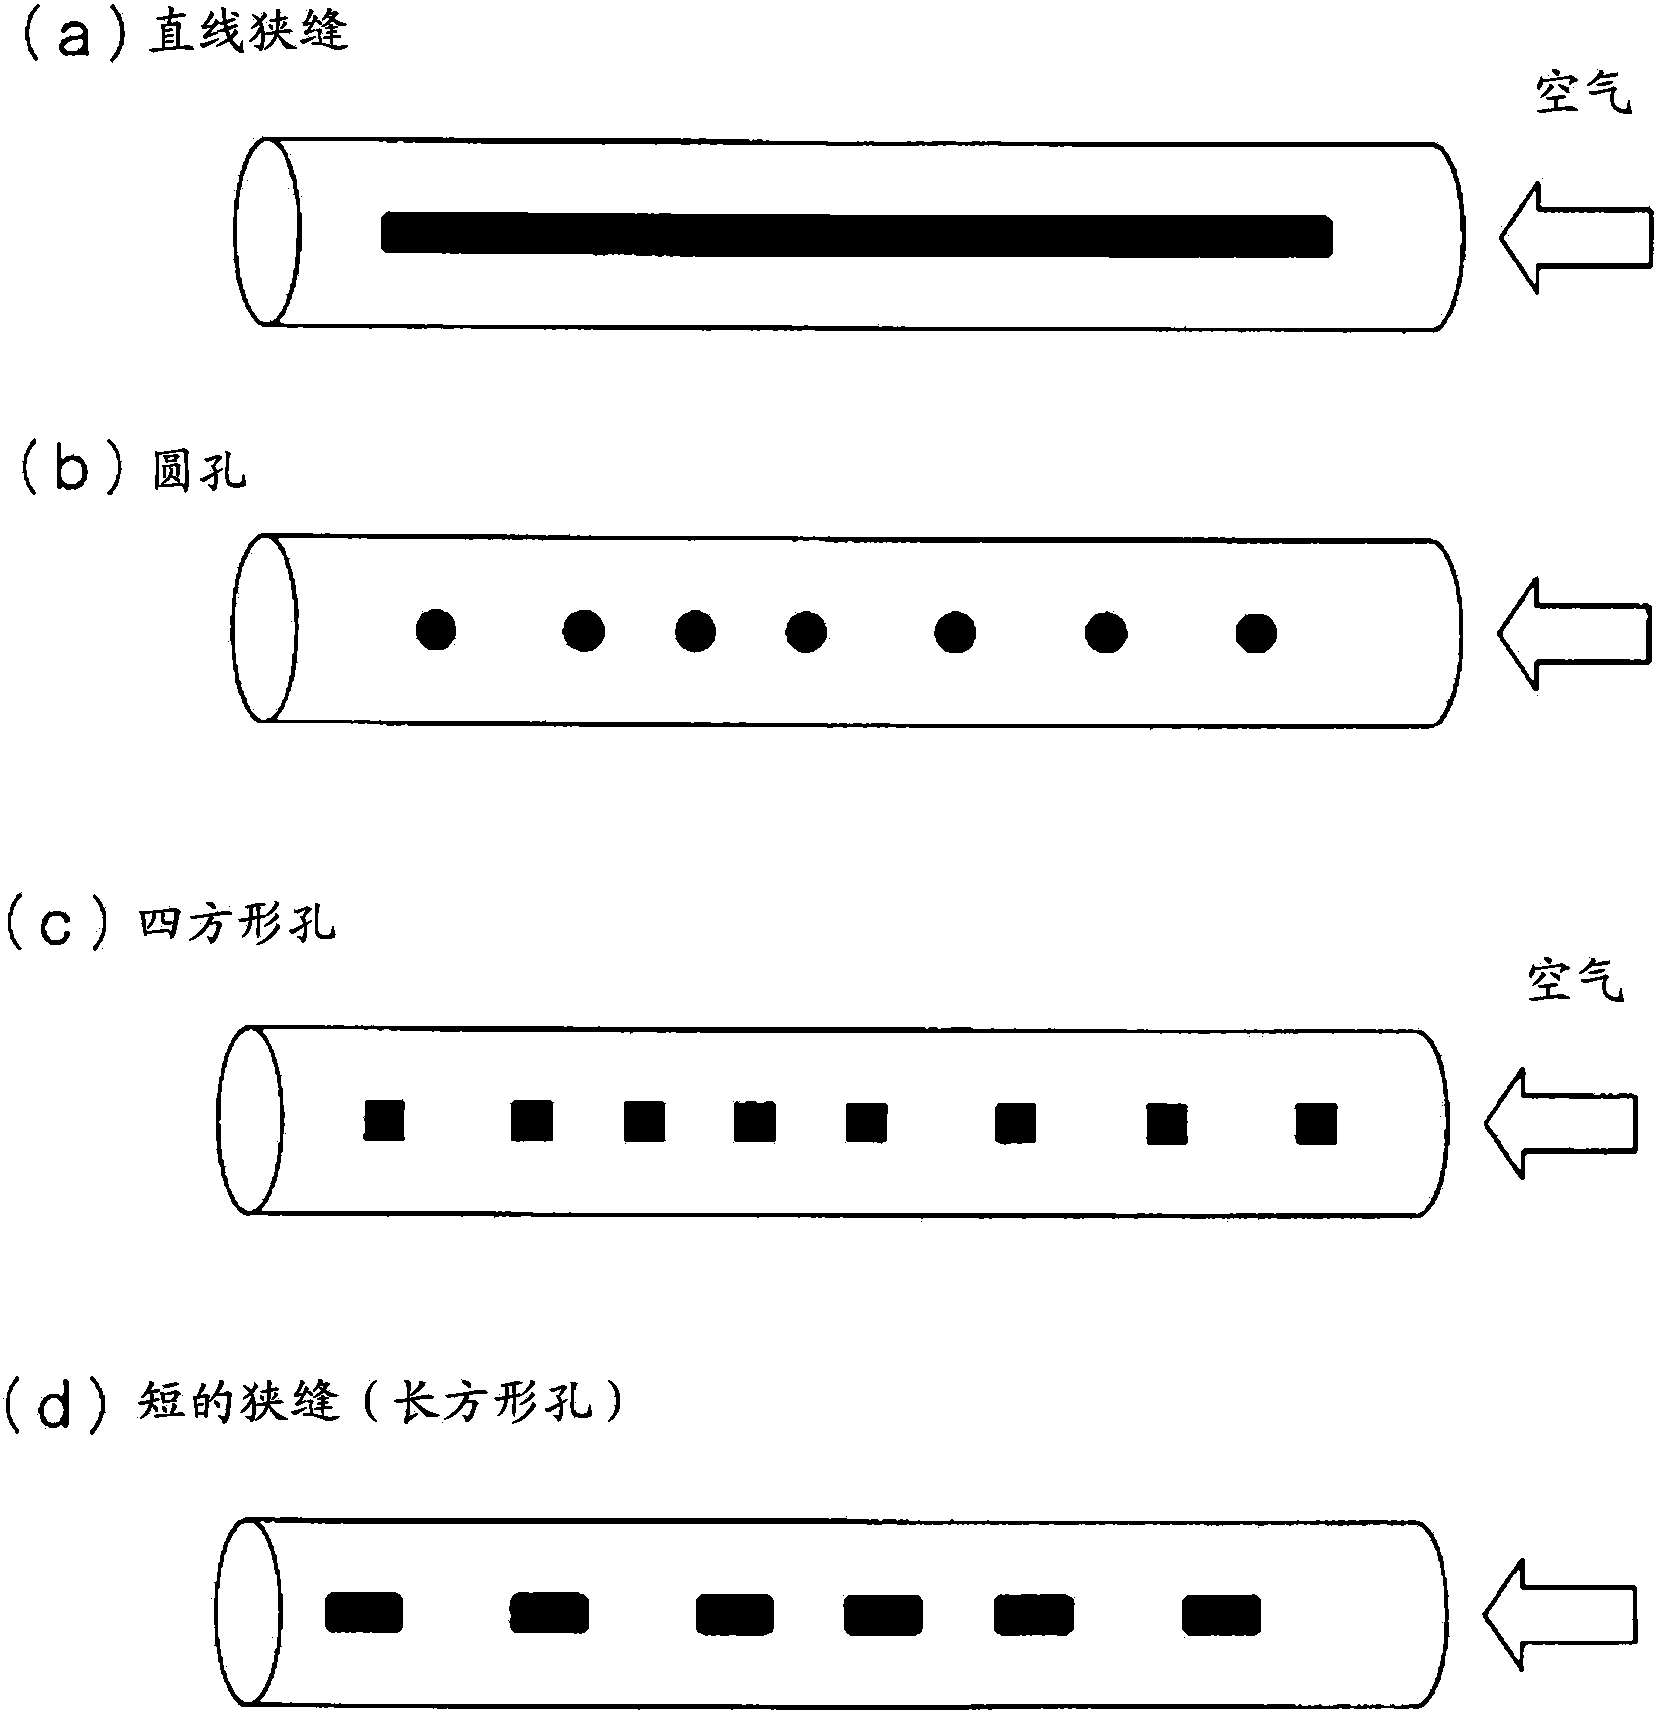 Method for producing instant noodles